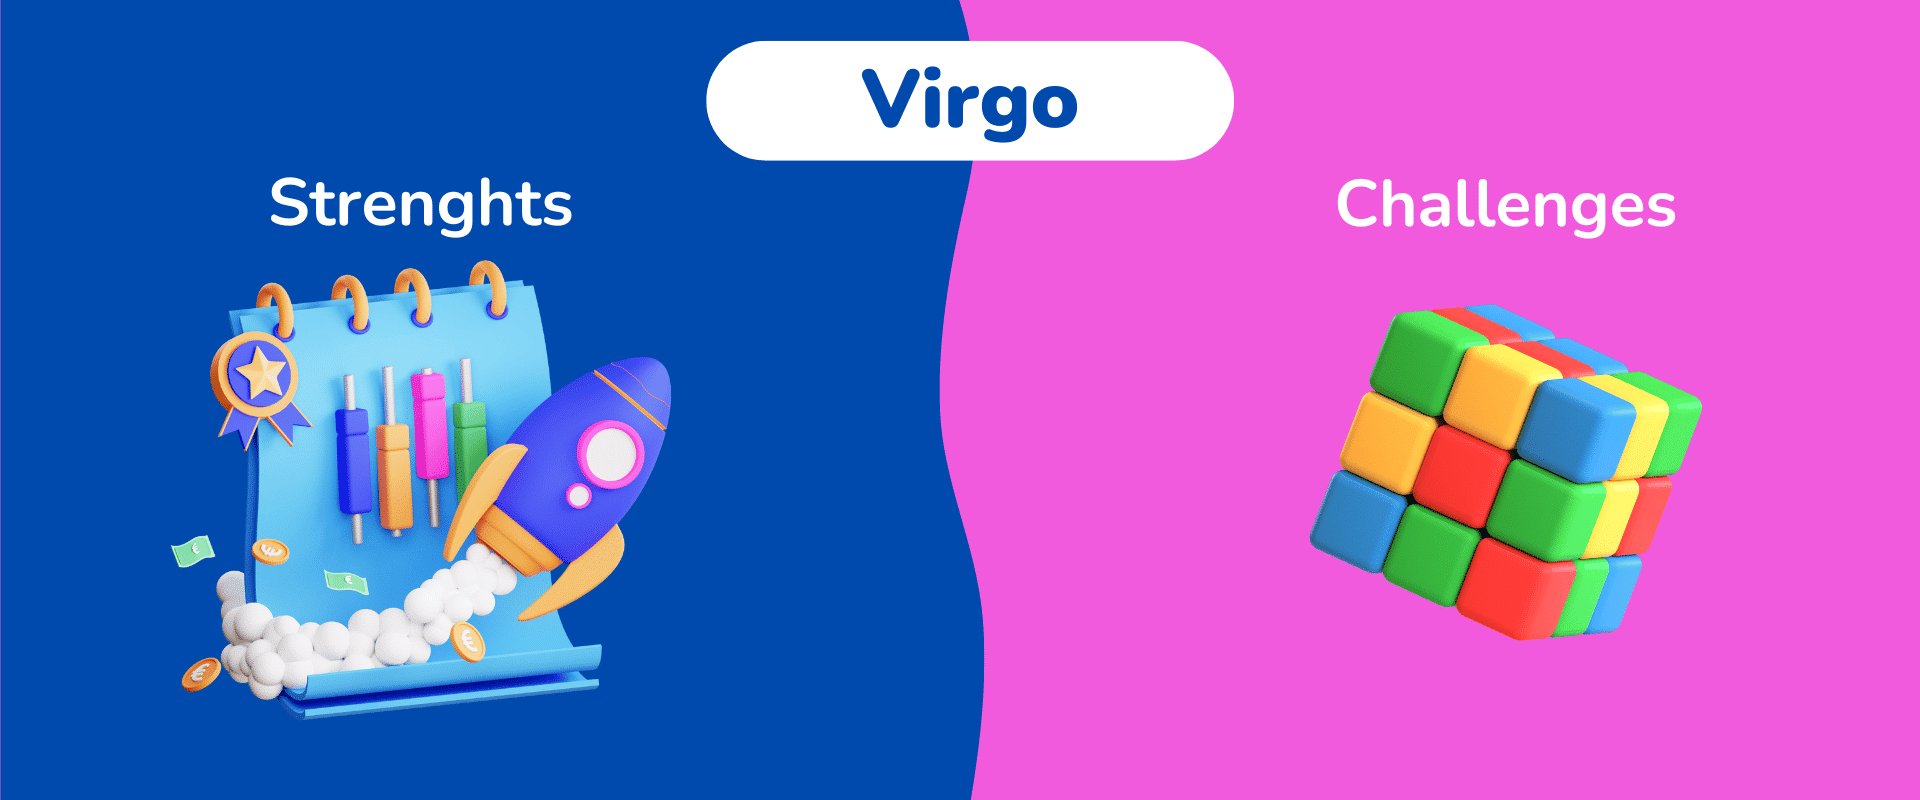 Virgo strengths and challenges